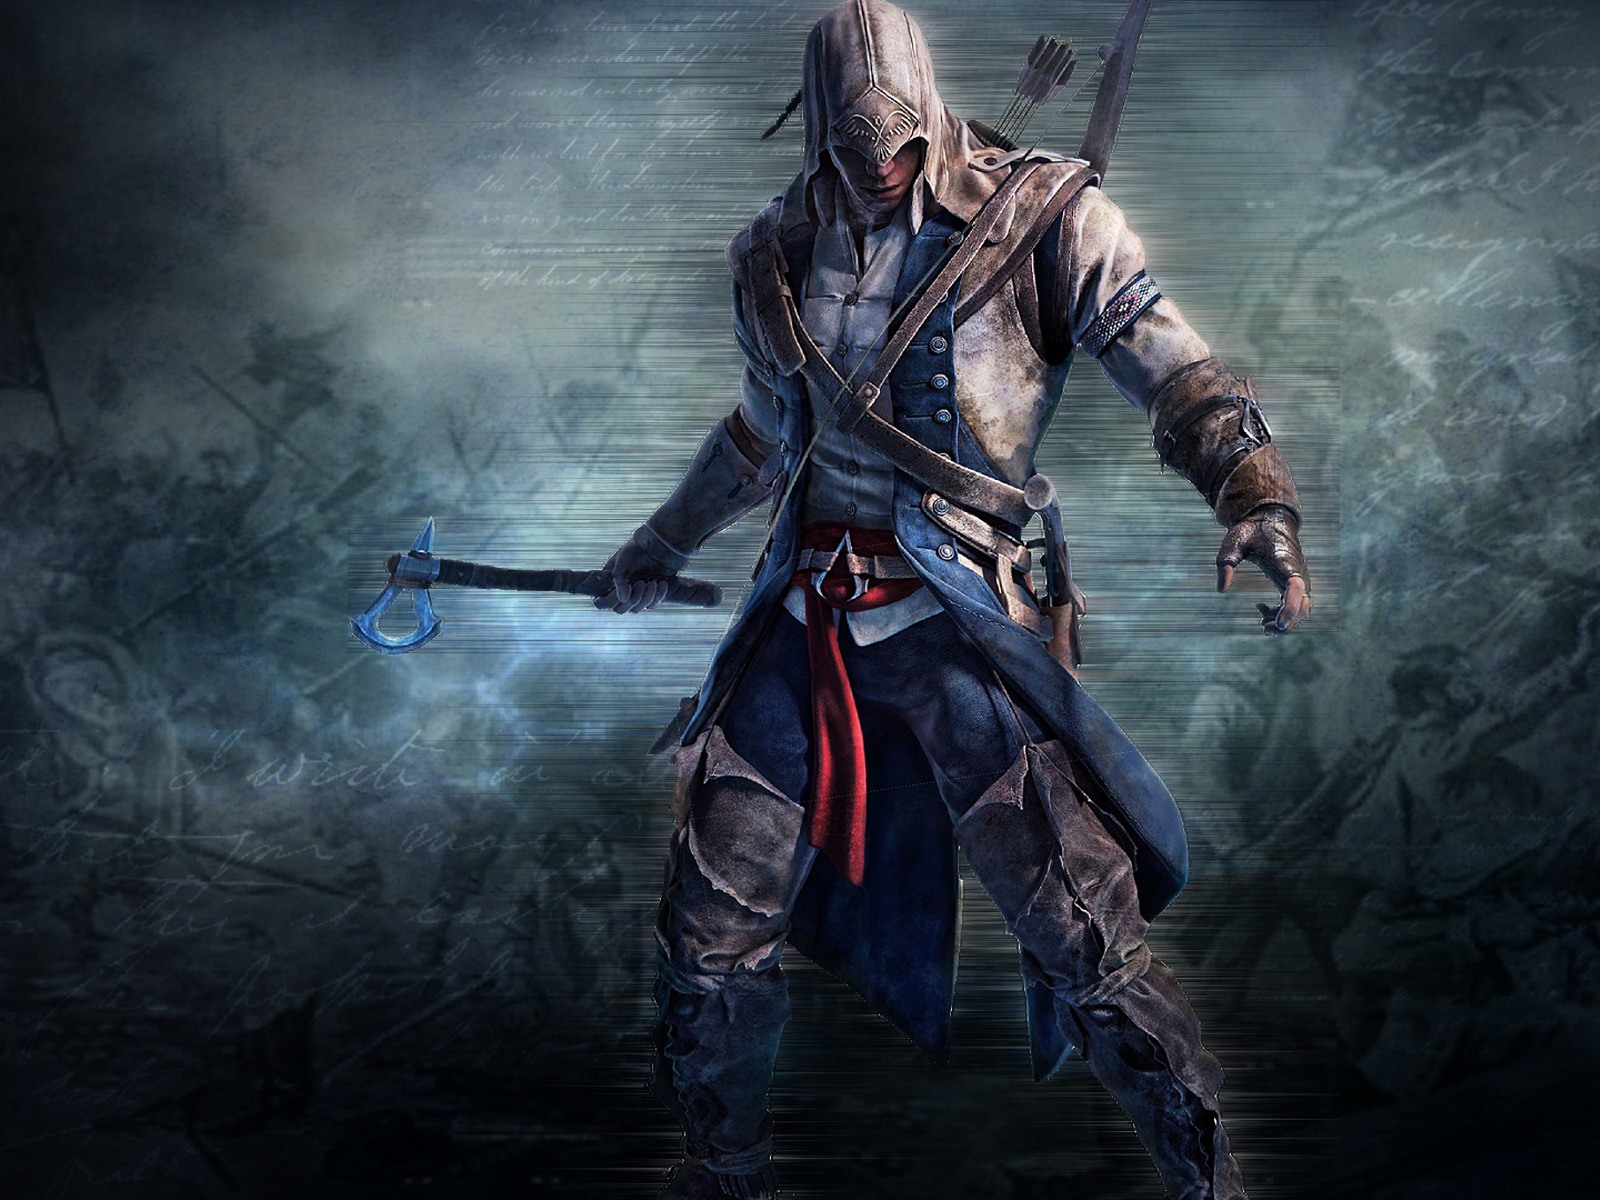 Assassin's Creed 3 HD wallpapers #19 - 1600x1200